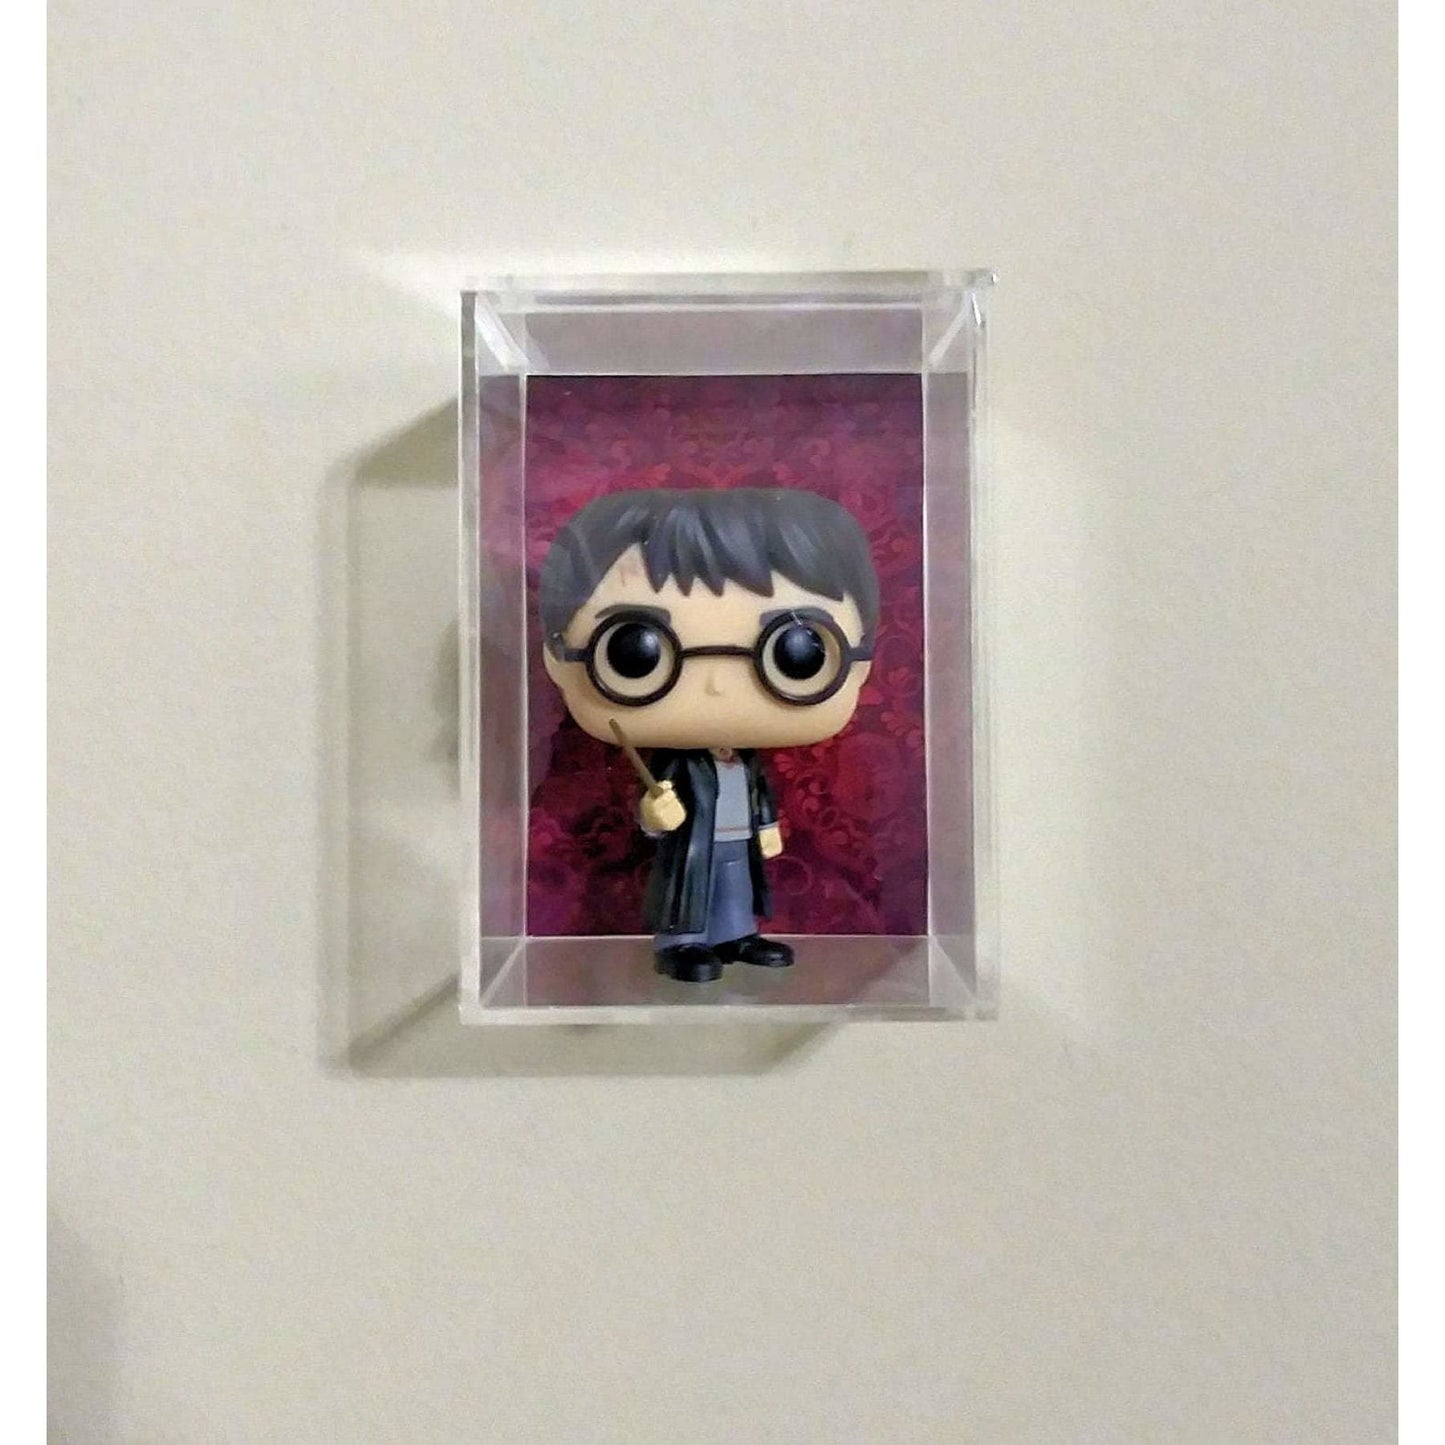 For Funko Pop: Wall Single Case with theme background, acrylic Box